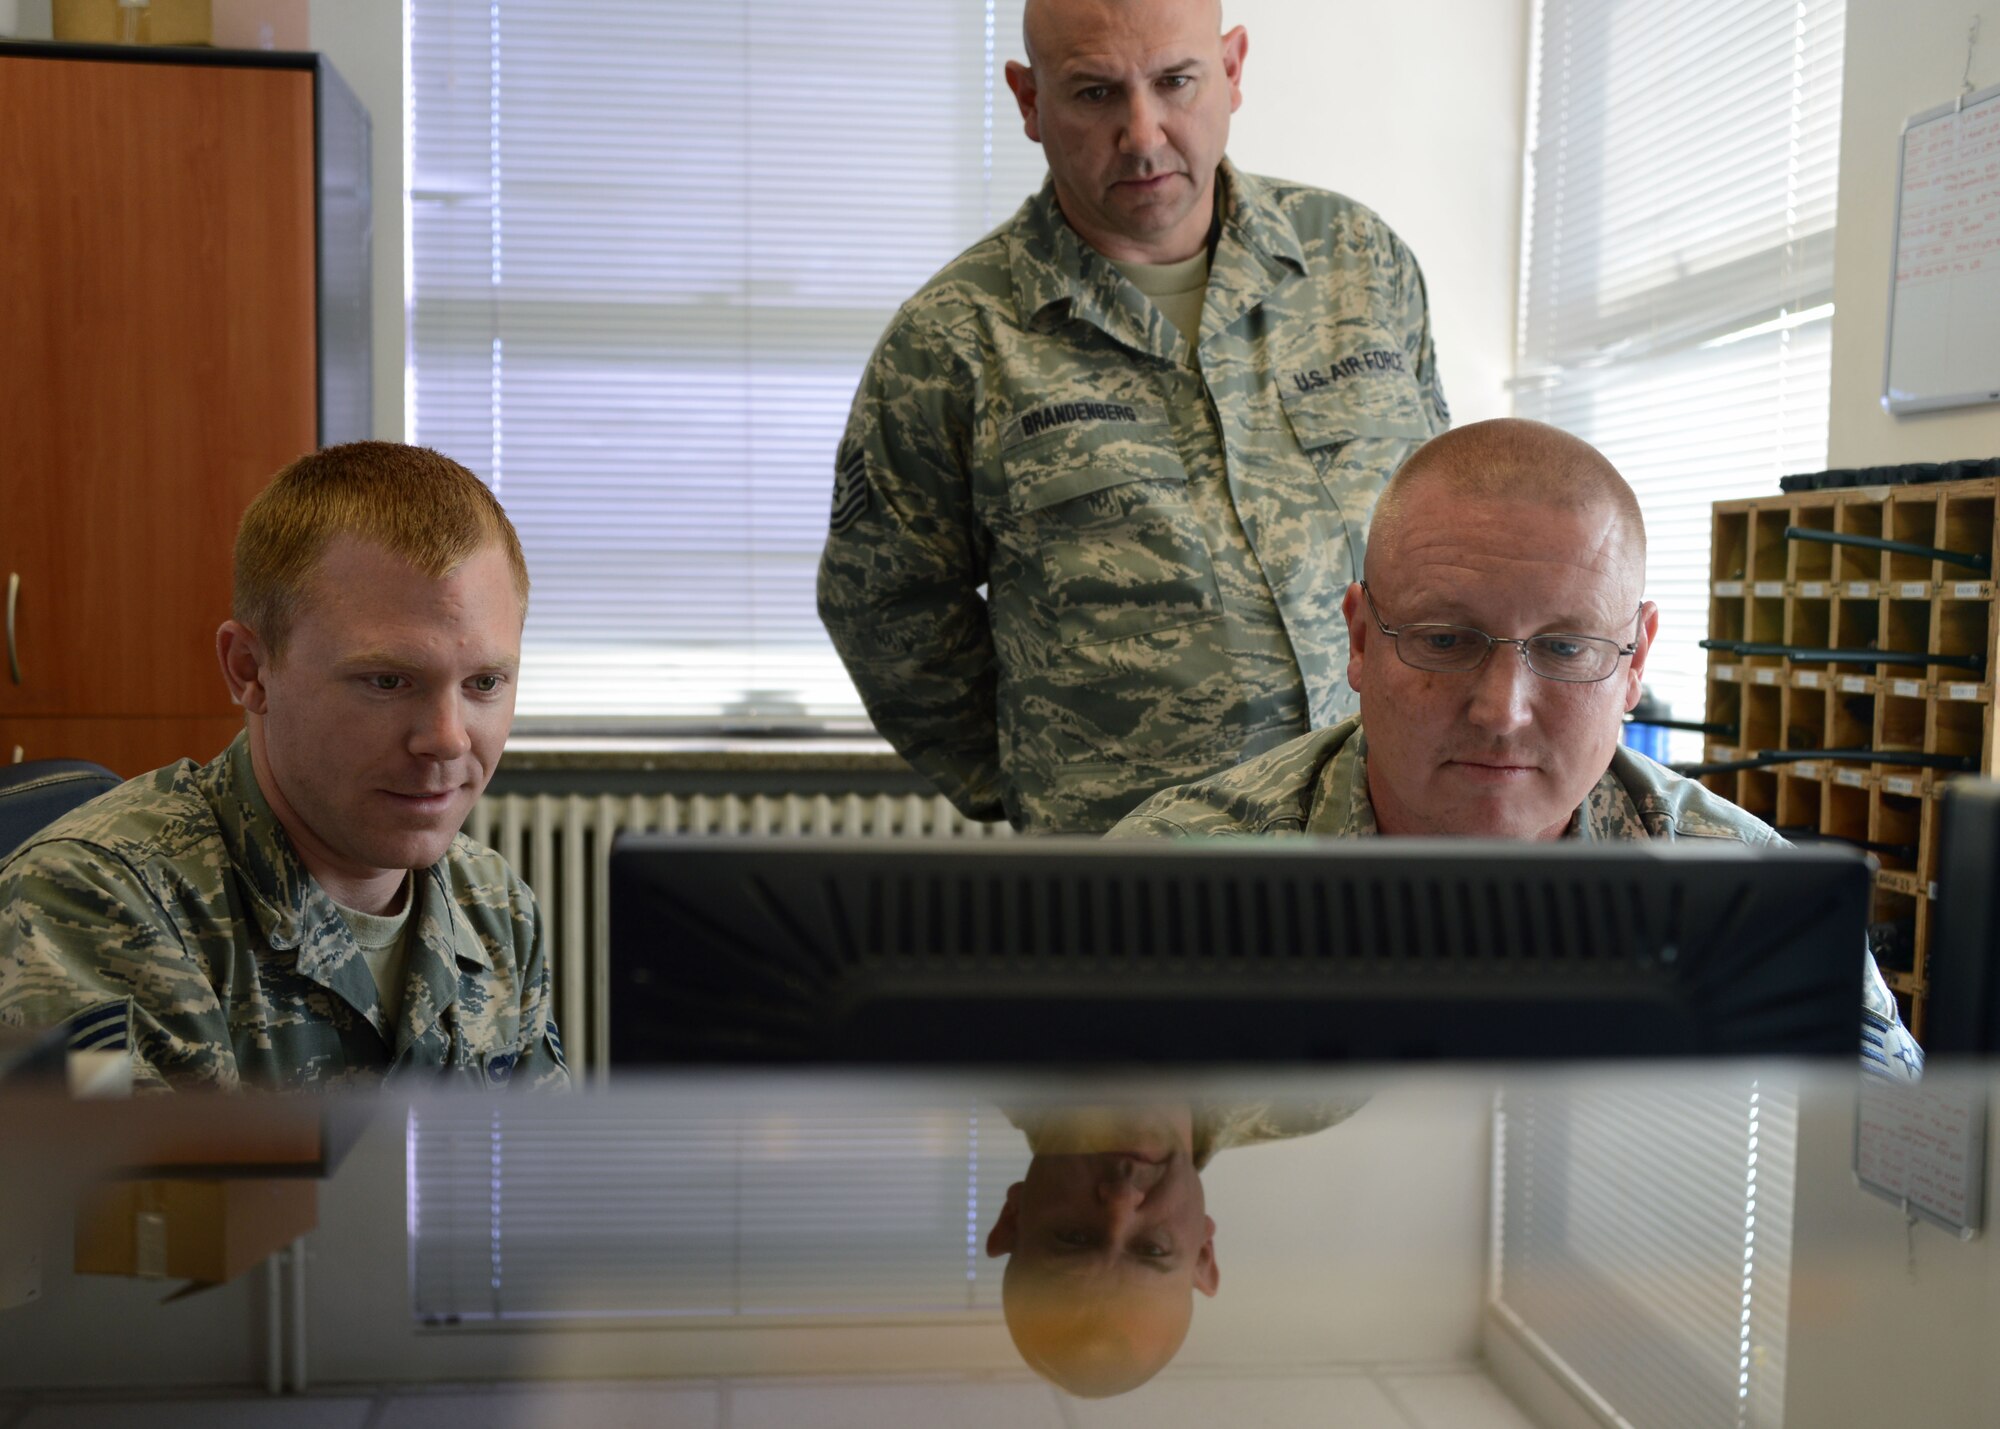 U.S. Air Force Senior Airman Aaron Cresson, a vehicle operator/dispatcher with the 31st Logistics Readiness Squadron, trains Tech. Sgts. Tracy Brandenburg and Richard Malloy on the Online Vehicle Interactive Management System, May 29, 2014 at Aviano Air Base, Italy. Brandenburg and Malloy, vehicle operators for the 175th Logistics Readiness Squadron, were part of the nearly 50 members of the Maryland National Guard deployed to Italy to train with their active duty counterparts. (National Guard photo by 2nd Lt. Benjamin Hughes)